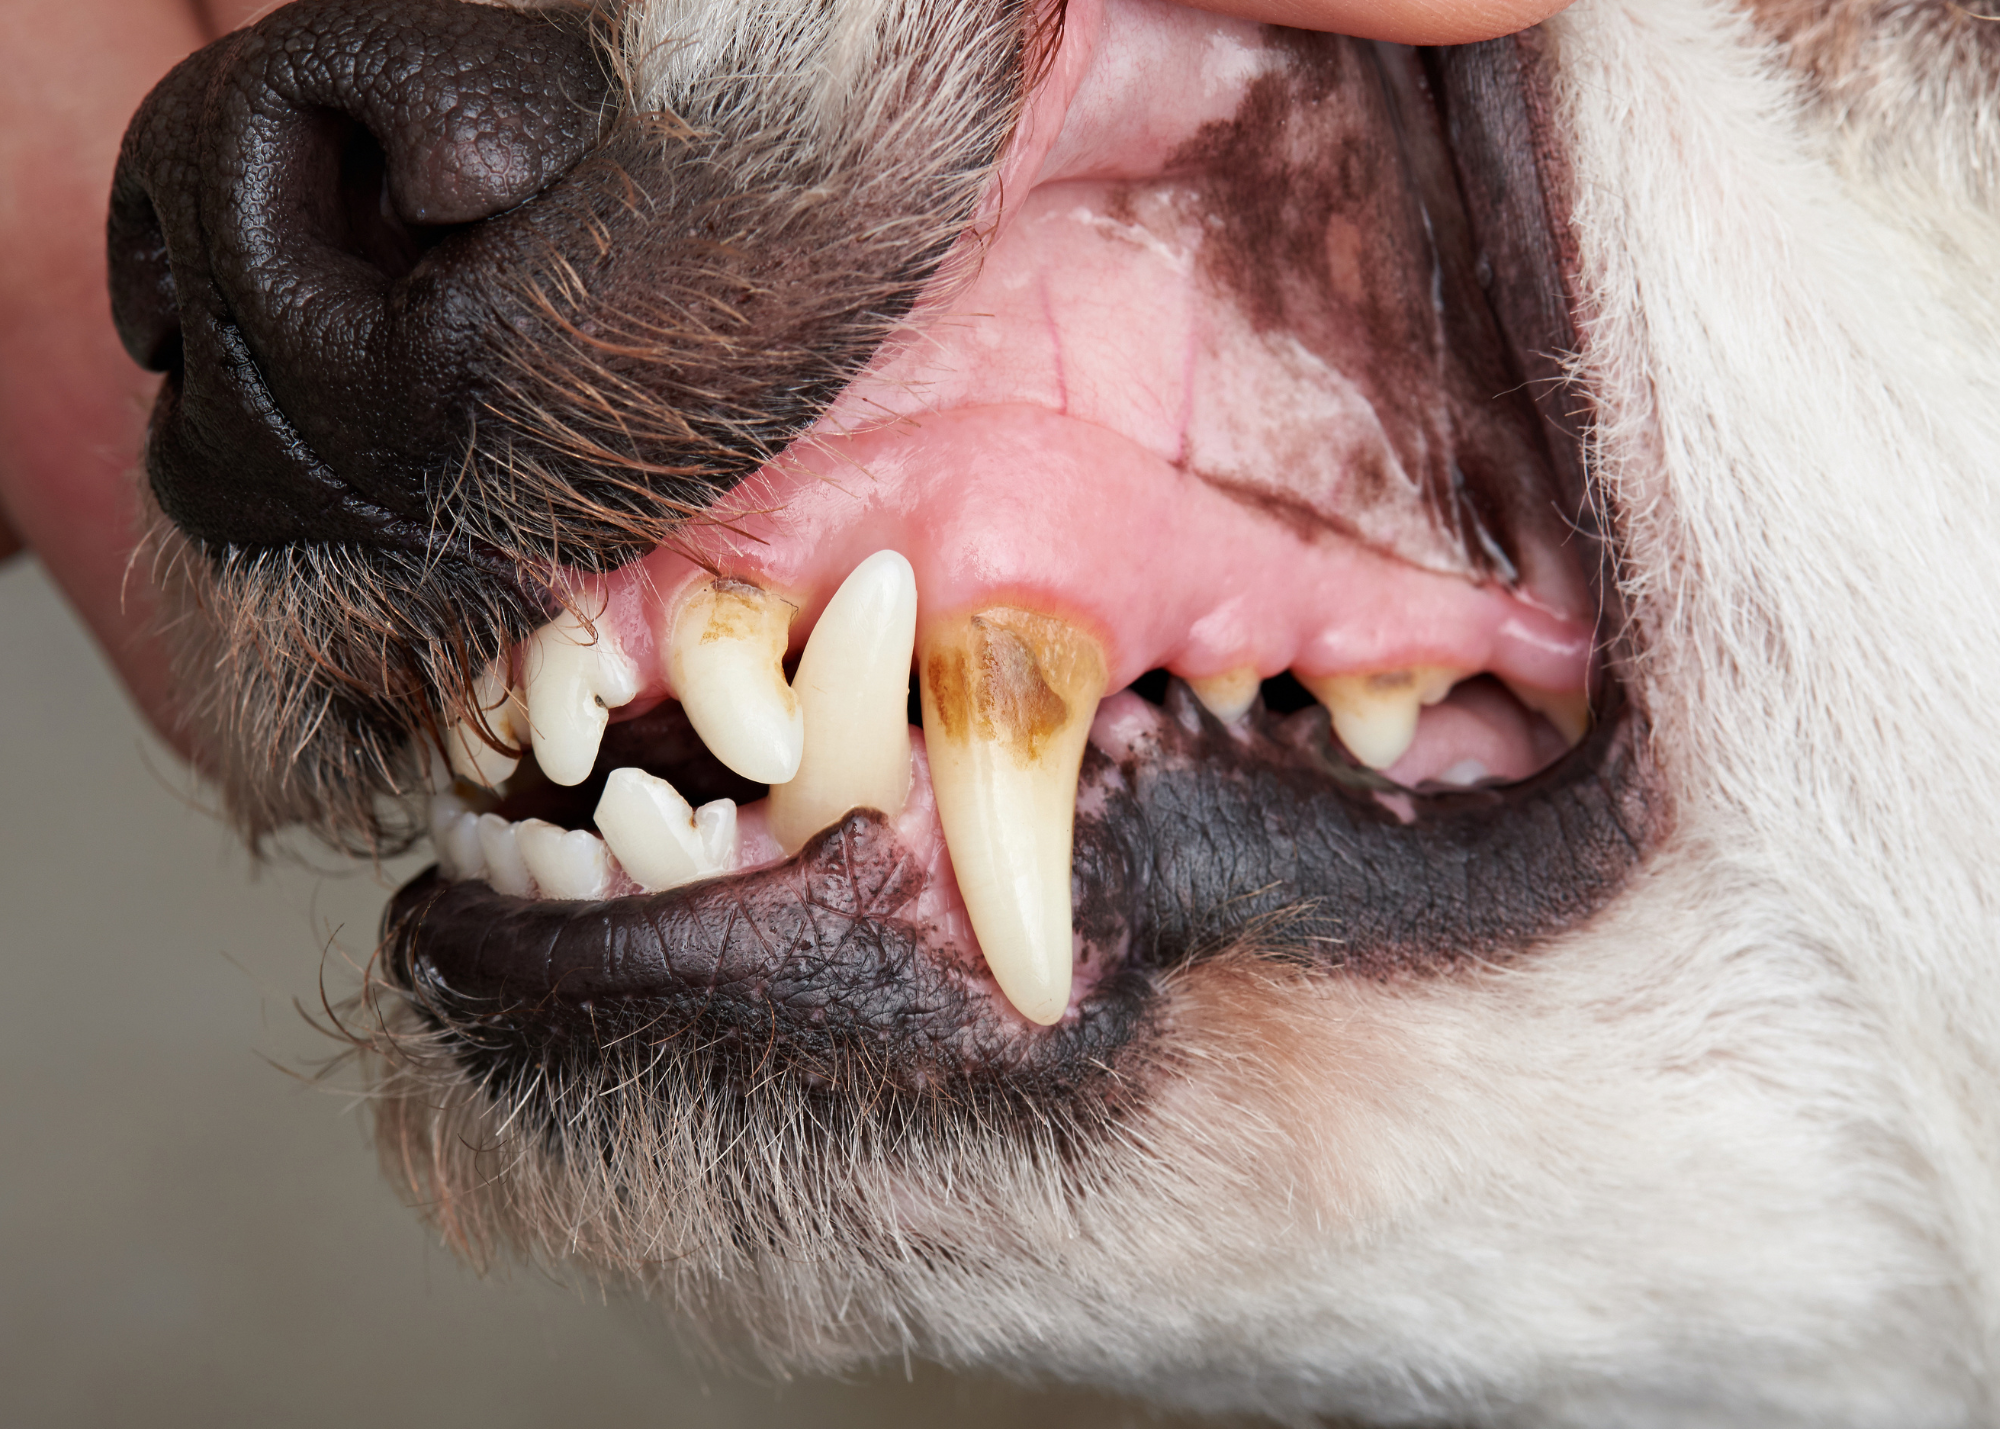 Dog teeth show brown plaque on them